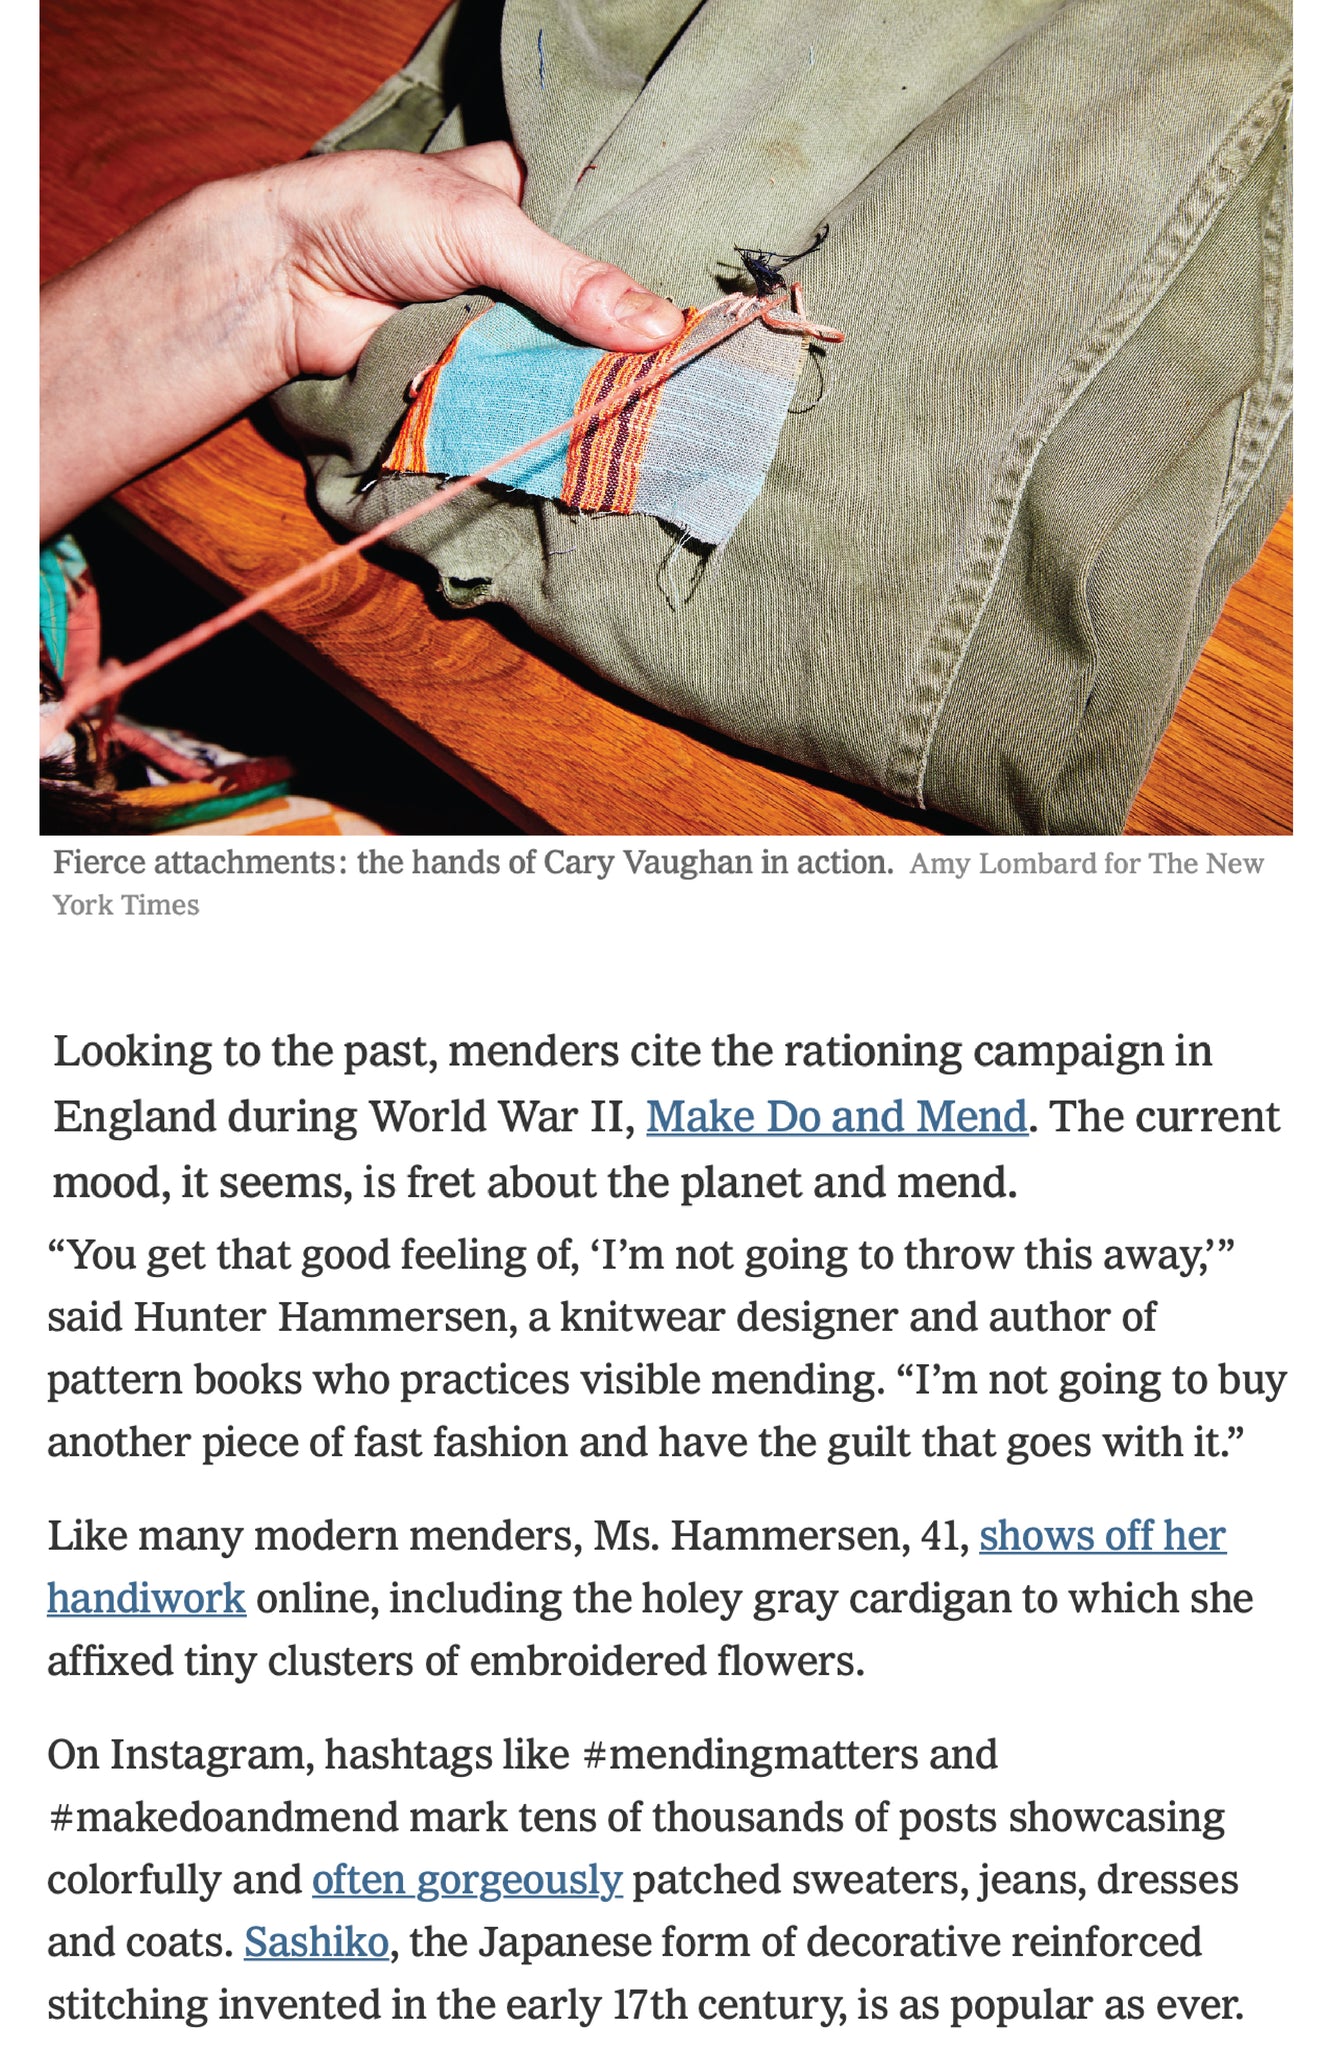 ace&jig featured in new york times